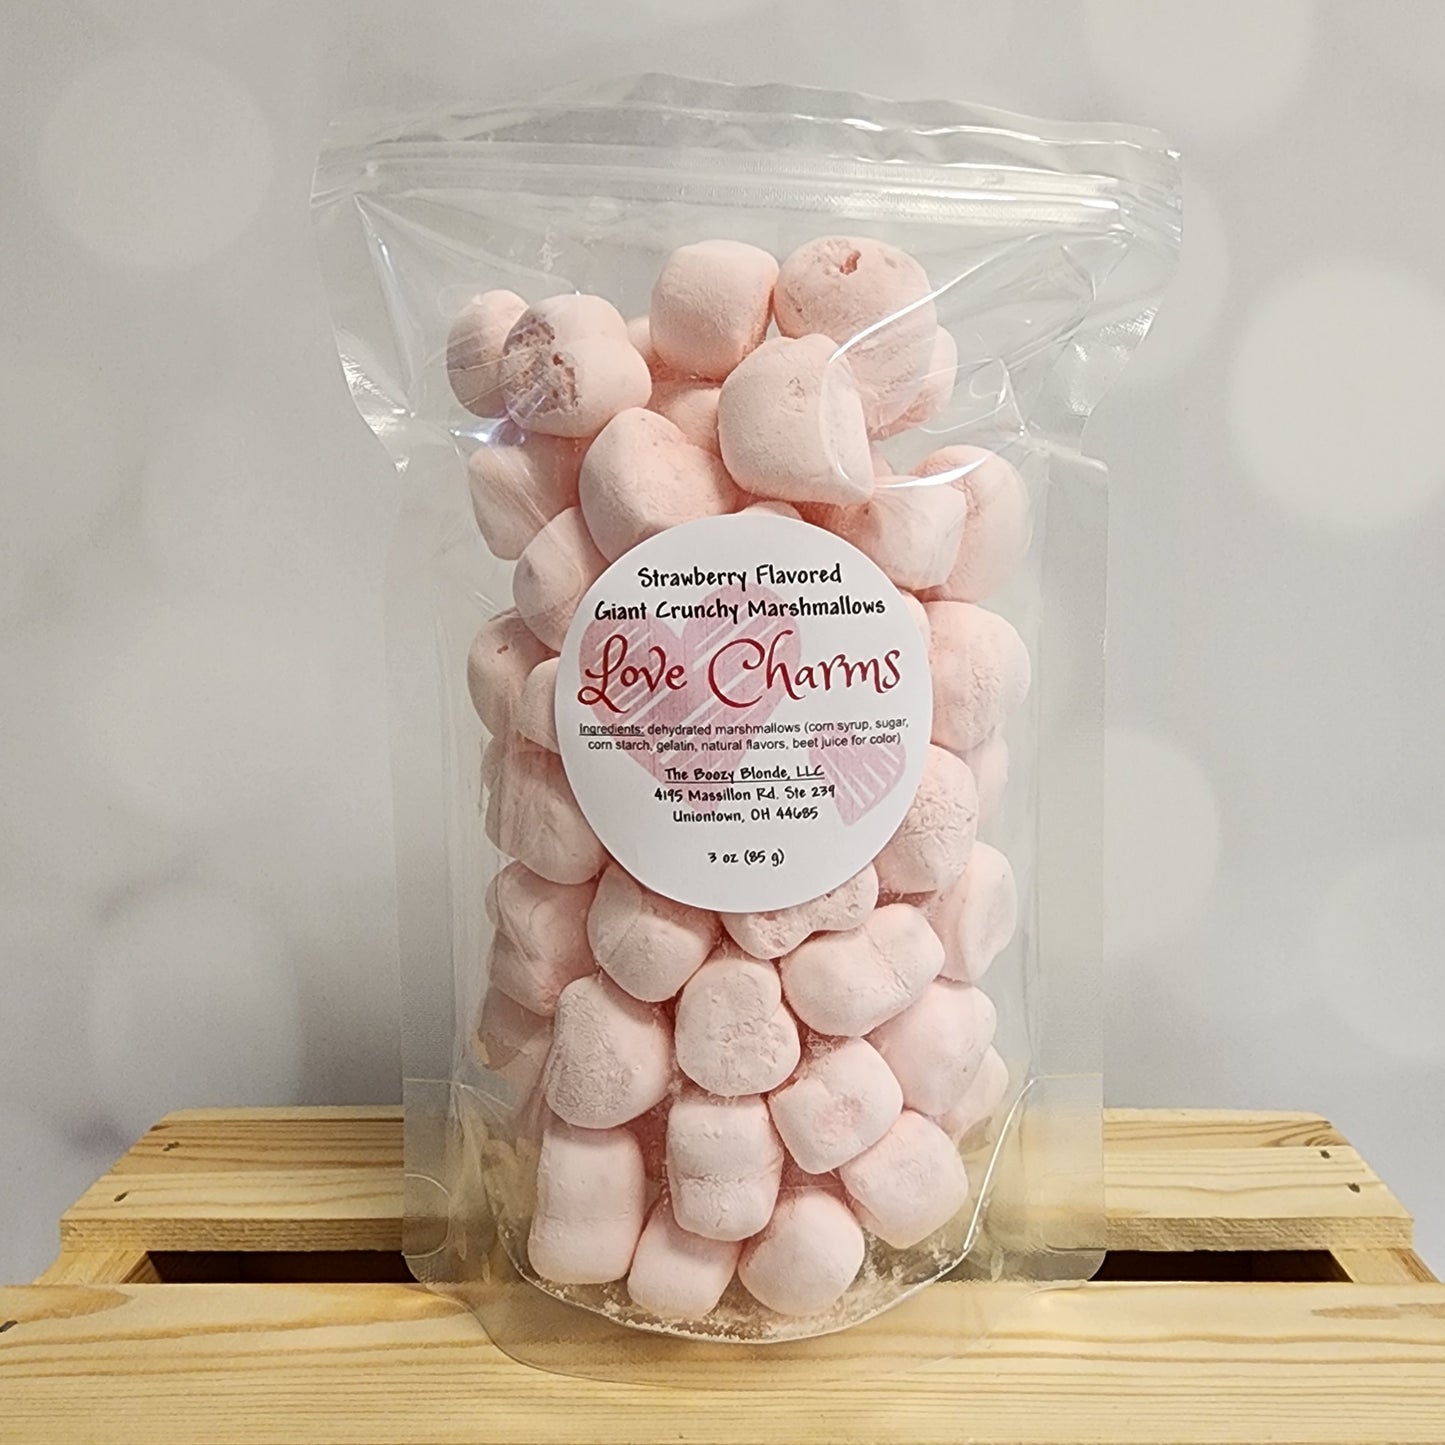 Cereal-Style Marshmallows